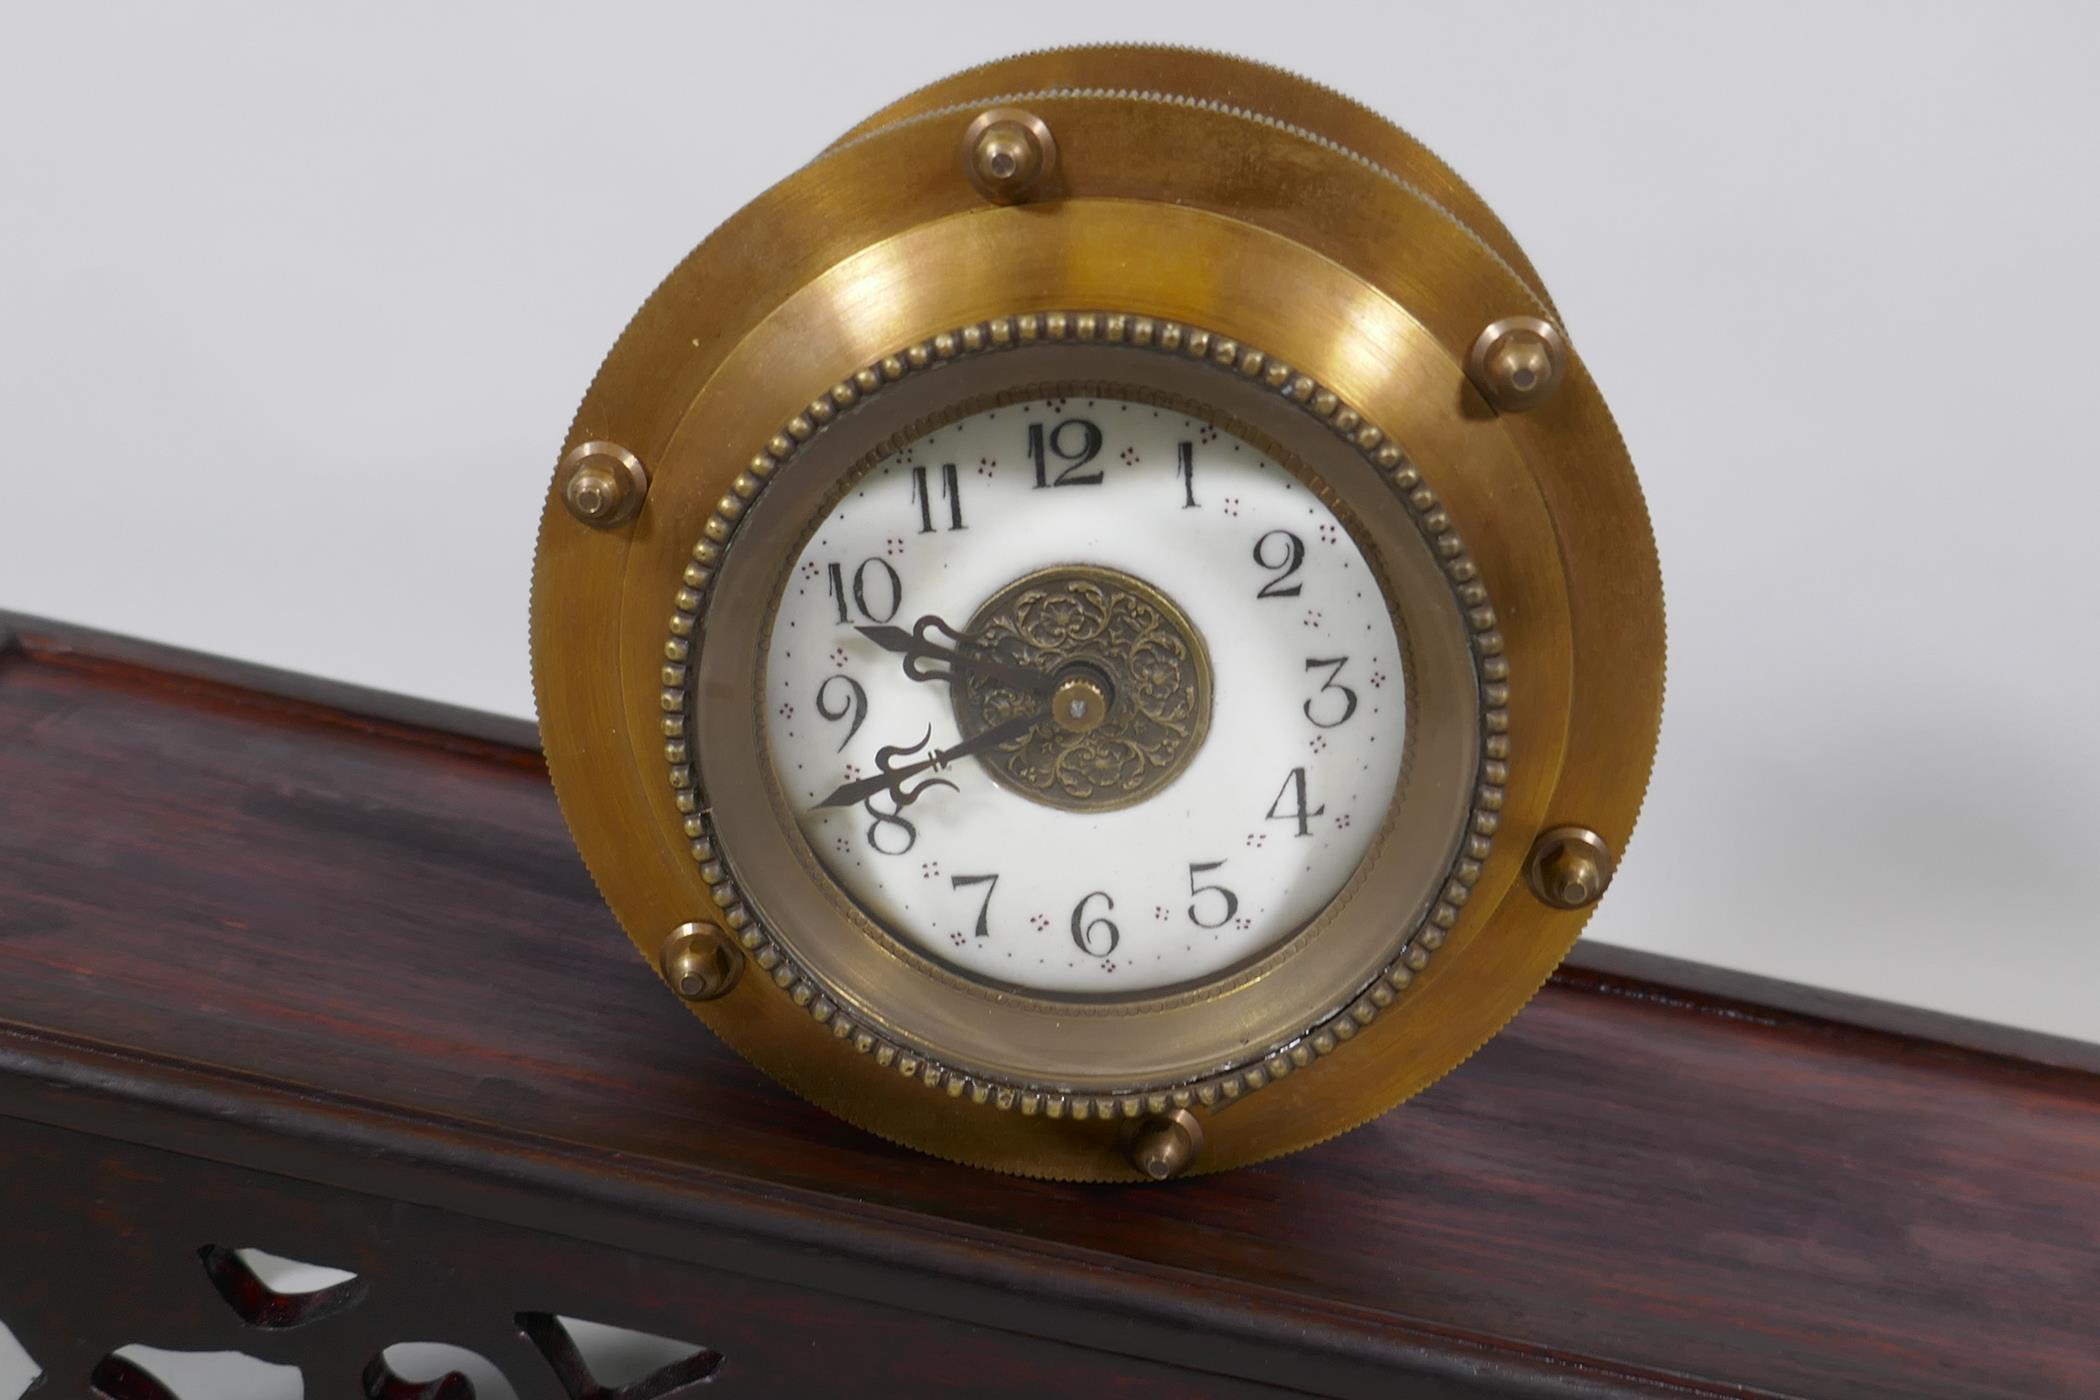 A brass cased gravity driven incline rolling clock with enamel dial and Arabic numerals, standing on - Image 2 of 3